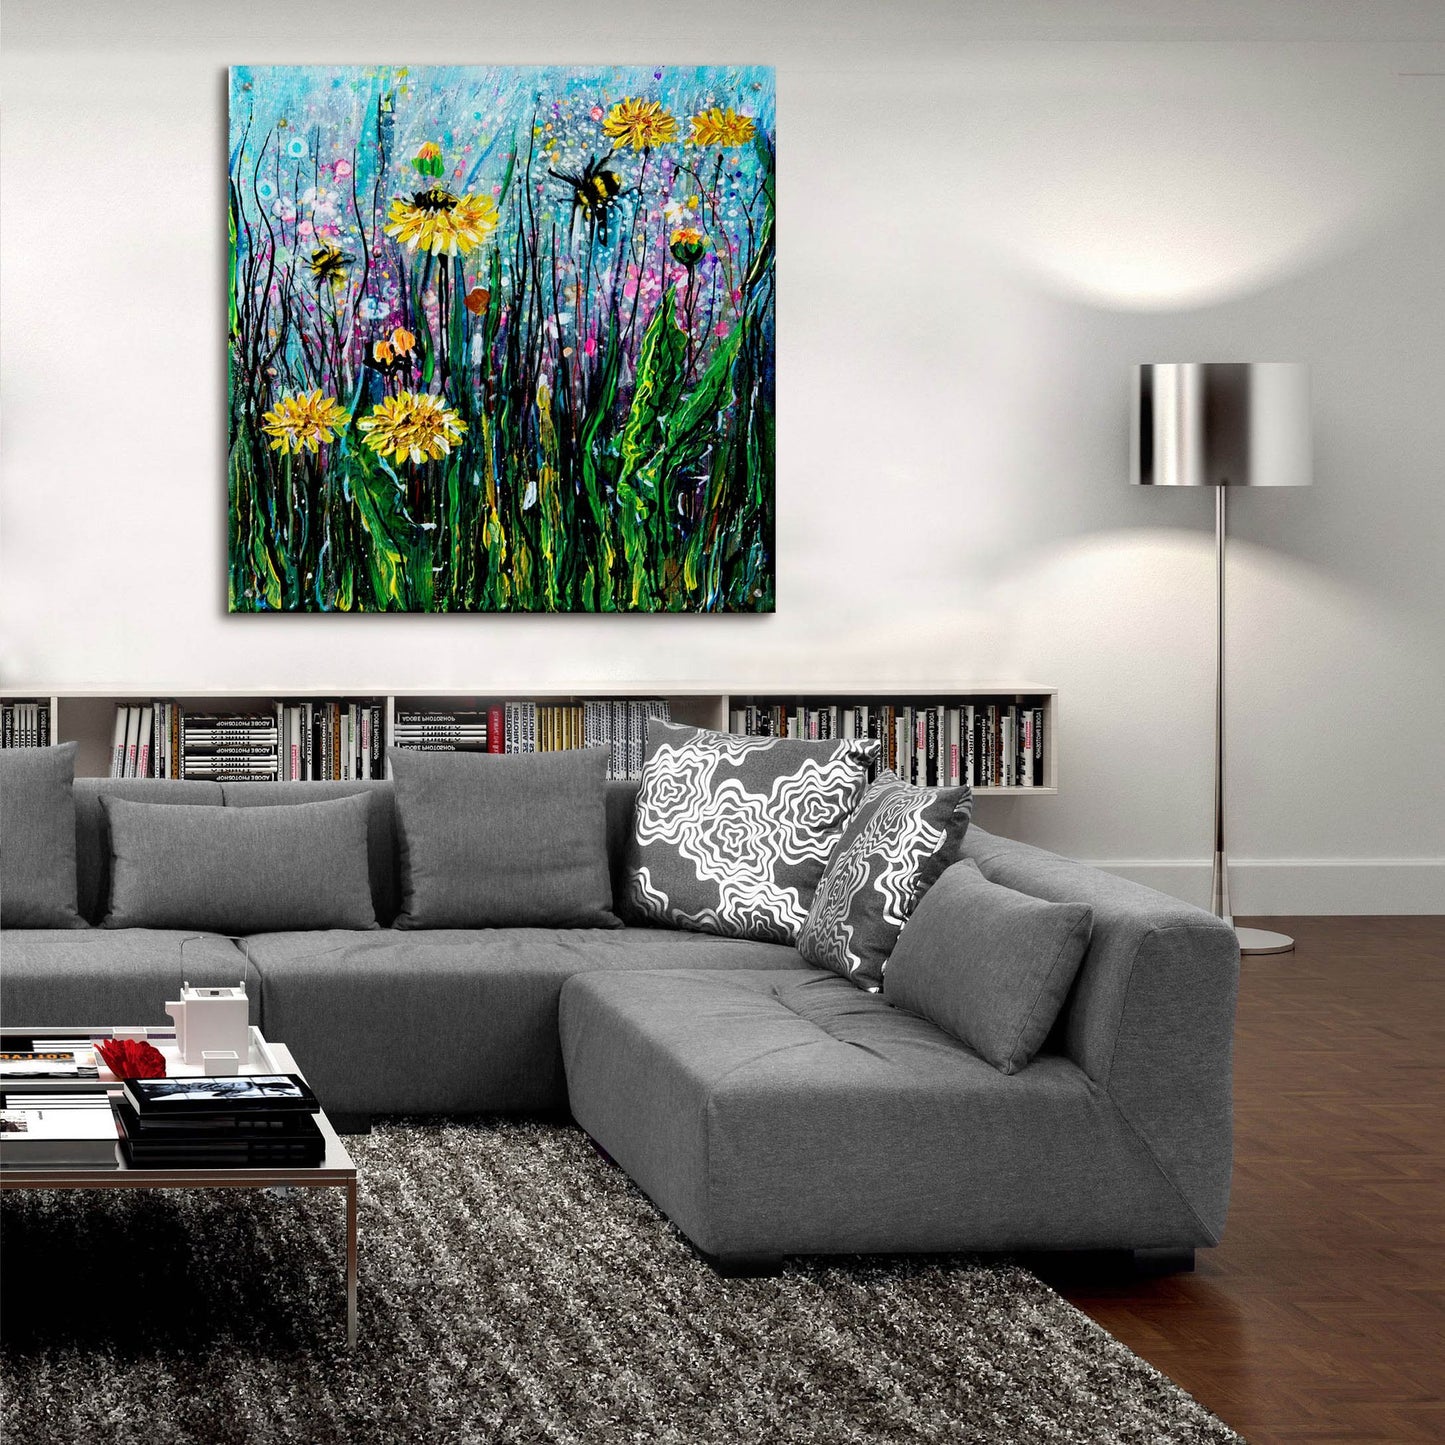 Epic Art 'Field of Flowers and a Bee' by Lena Owens, Acrylic Glass Wall Art,36x36